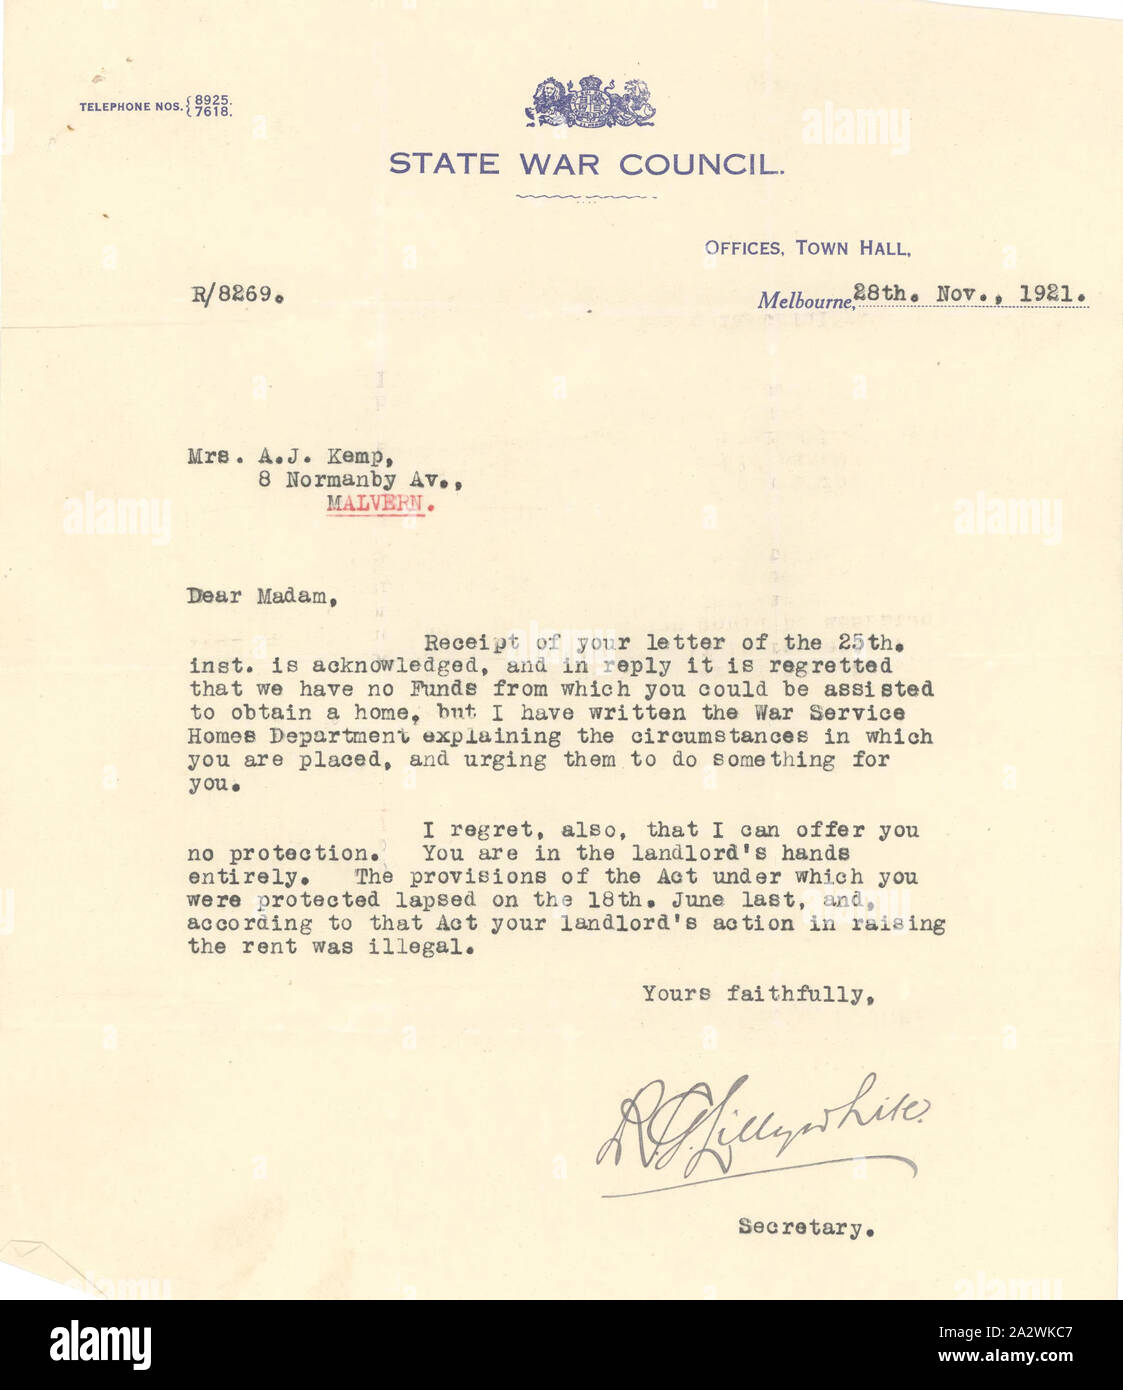 Letter - State War Council Secretary to Mrs A. J. Kemp, Request for Funds, 28 Nov 1921, Addressed to Annie Kemp, widow of Pte Albert Edward Kemp, who was killed in action in 1917, during World War I. The letter declines her request for financial support, but refers her onto the War Service Homes Department Stock Photo